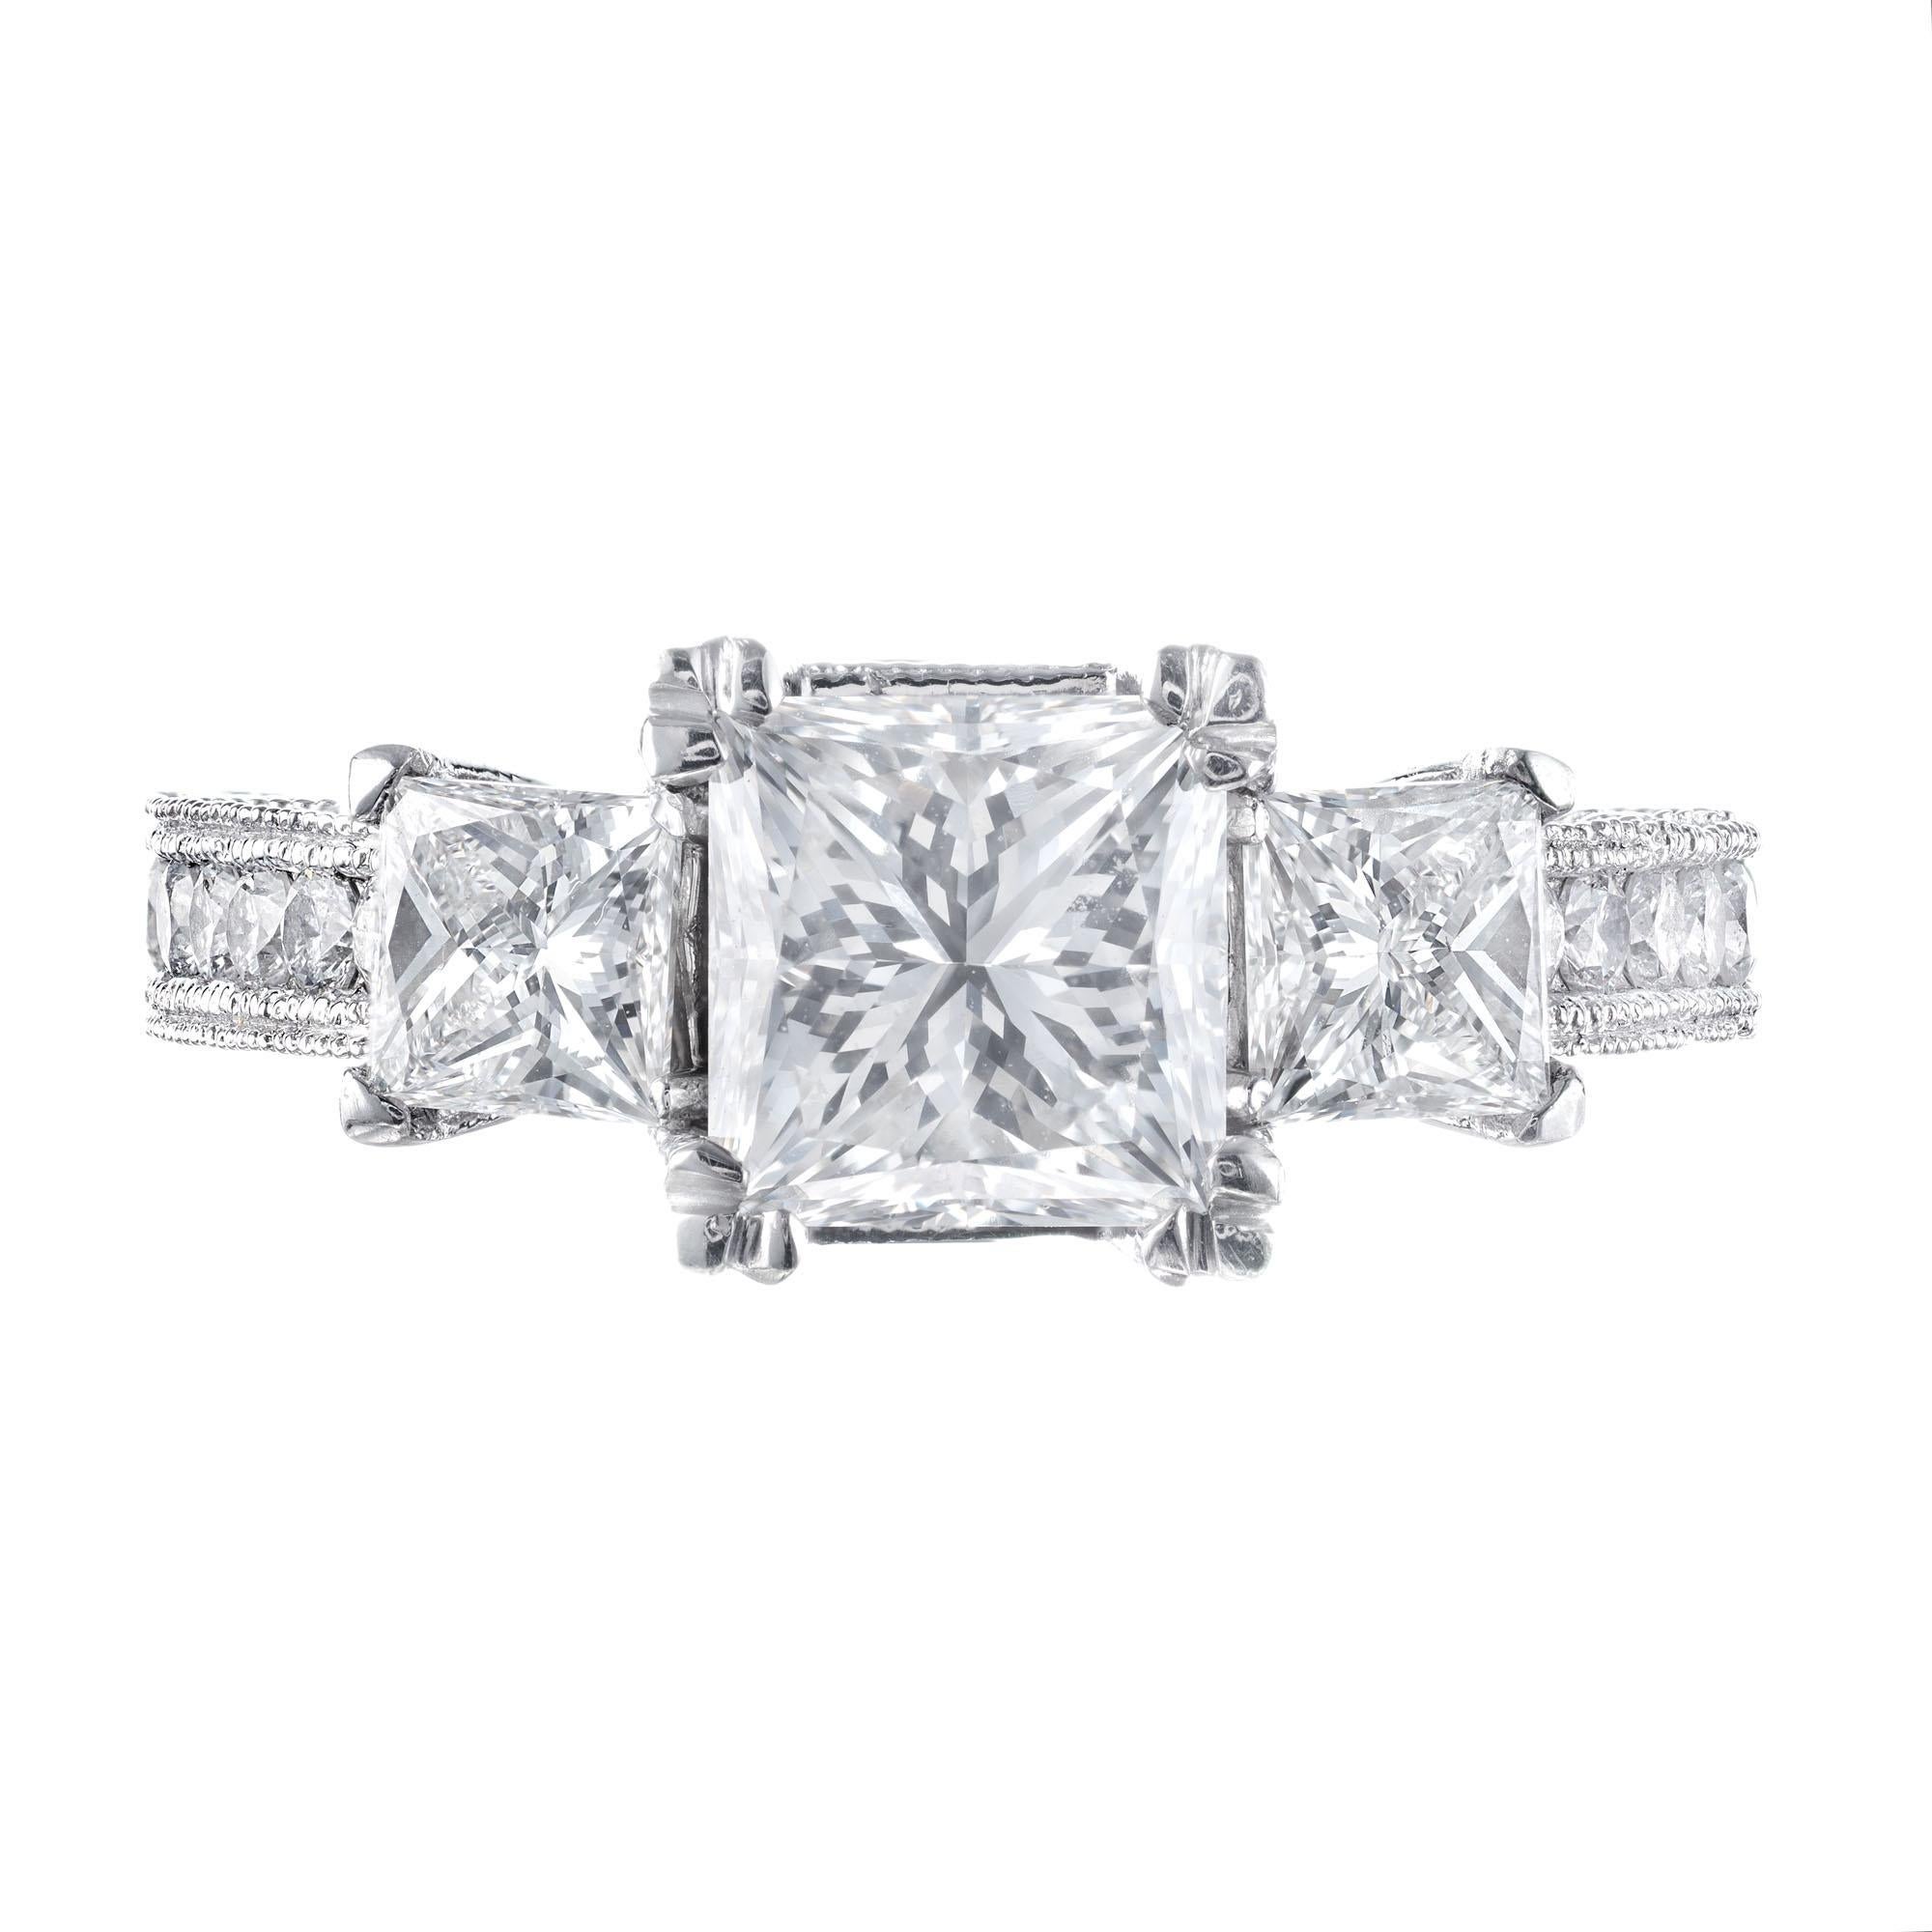 Three-stone diamond engagement ring. Square cut GIA certified center stone with two square cut accent diamonds accented with 32 round brilliant cut diamonds in a Platinum, three-stone bead setting. 

1 square modified brilliant cut diamond, G VVS2